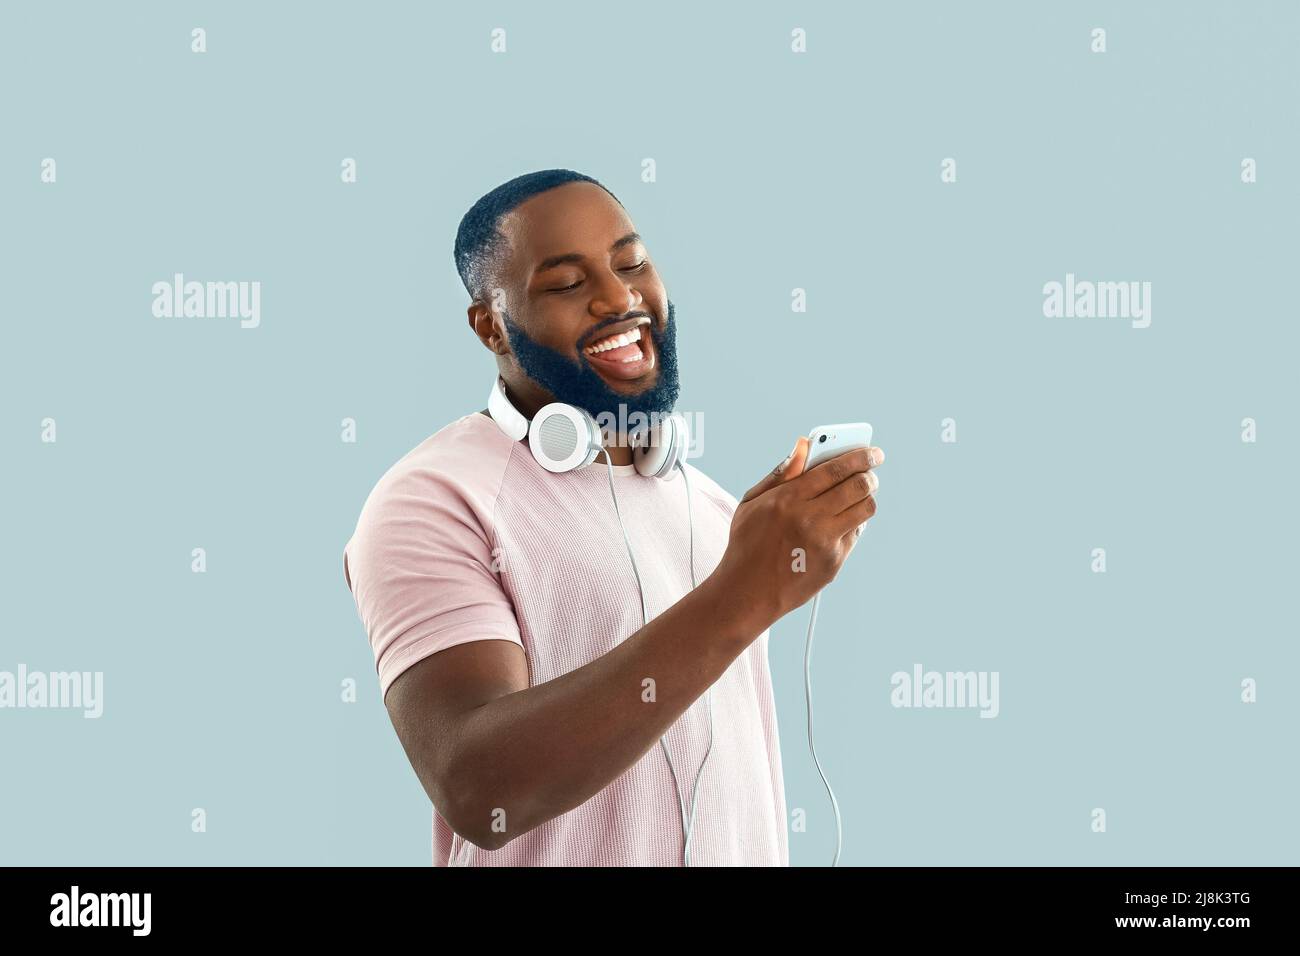 Happy African-American man with unusual color of hair and beard holding smartphone on light background Stock Photo